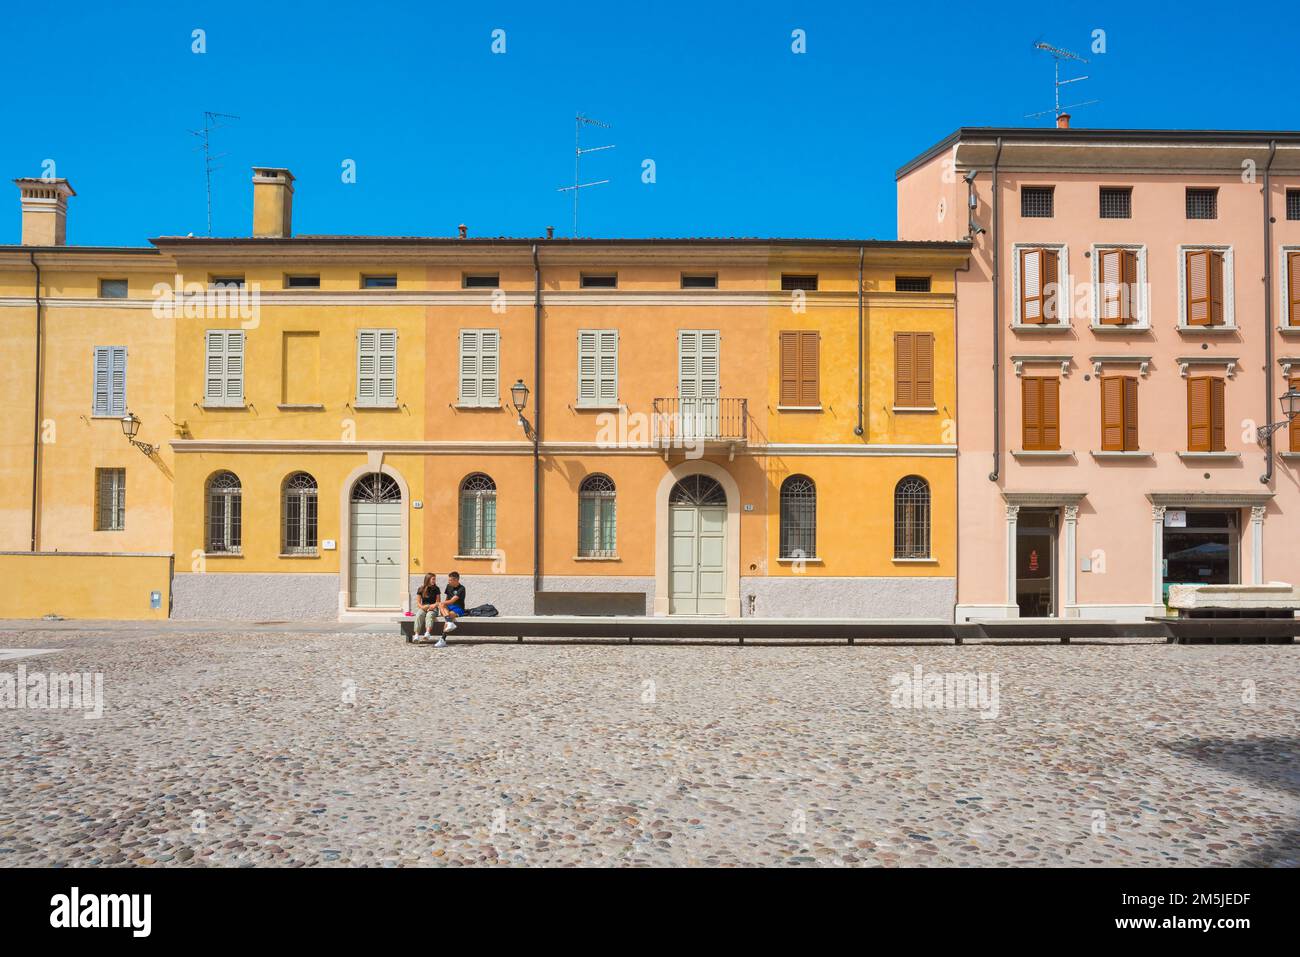 Young love summer Europe, view of two young people talking as they sit alone together in a colourful square in Mantua, Lombardy, Italy Stock Photo